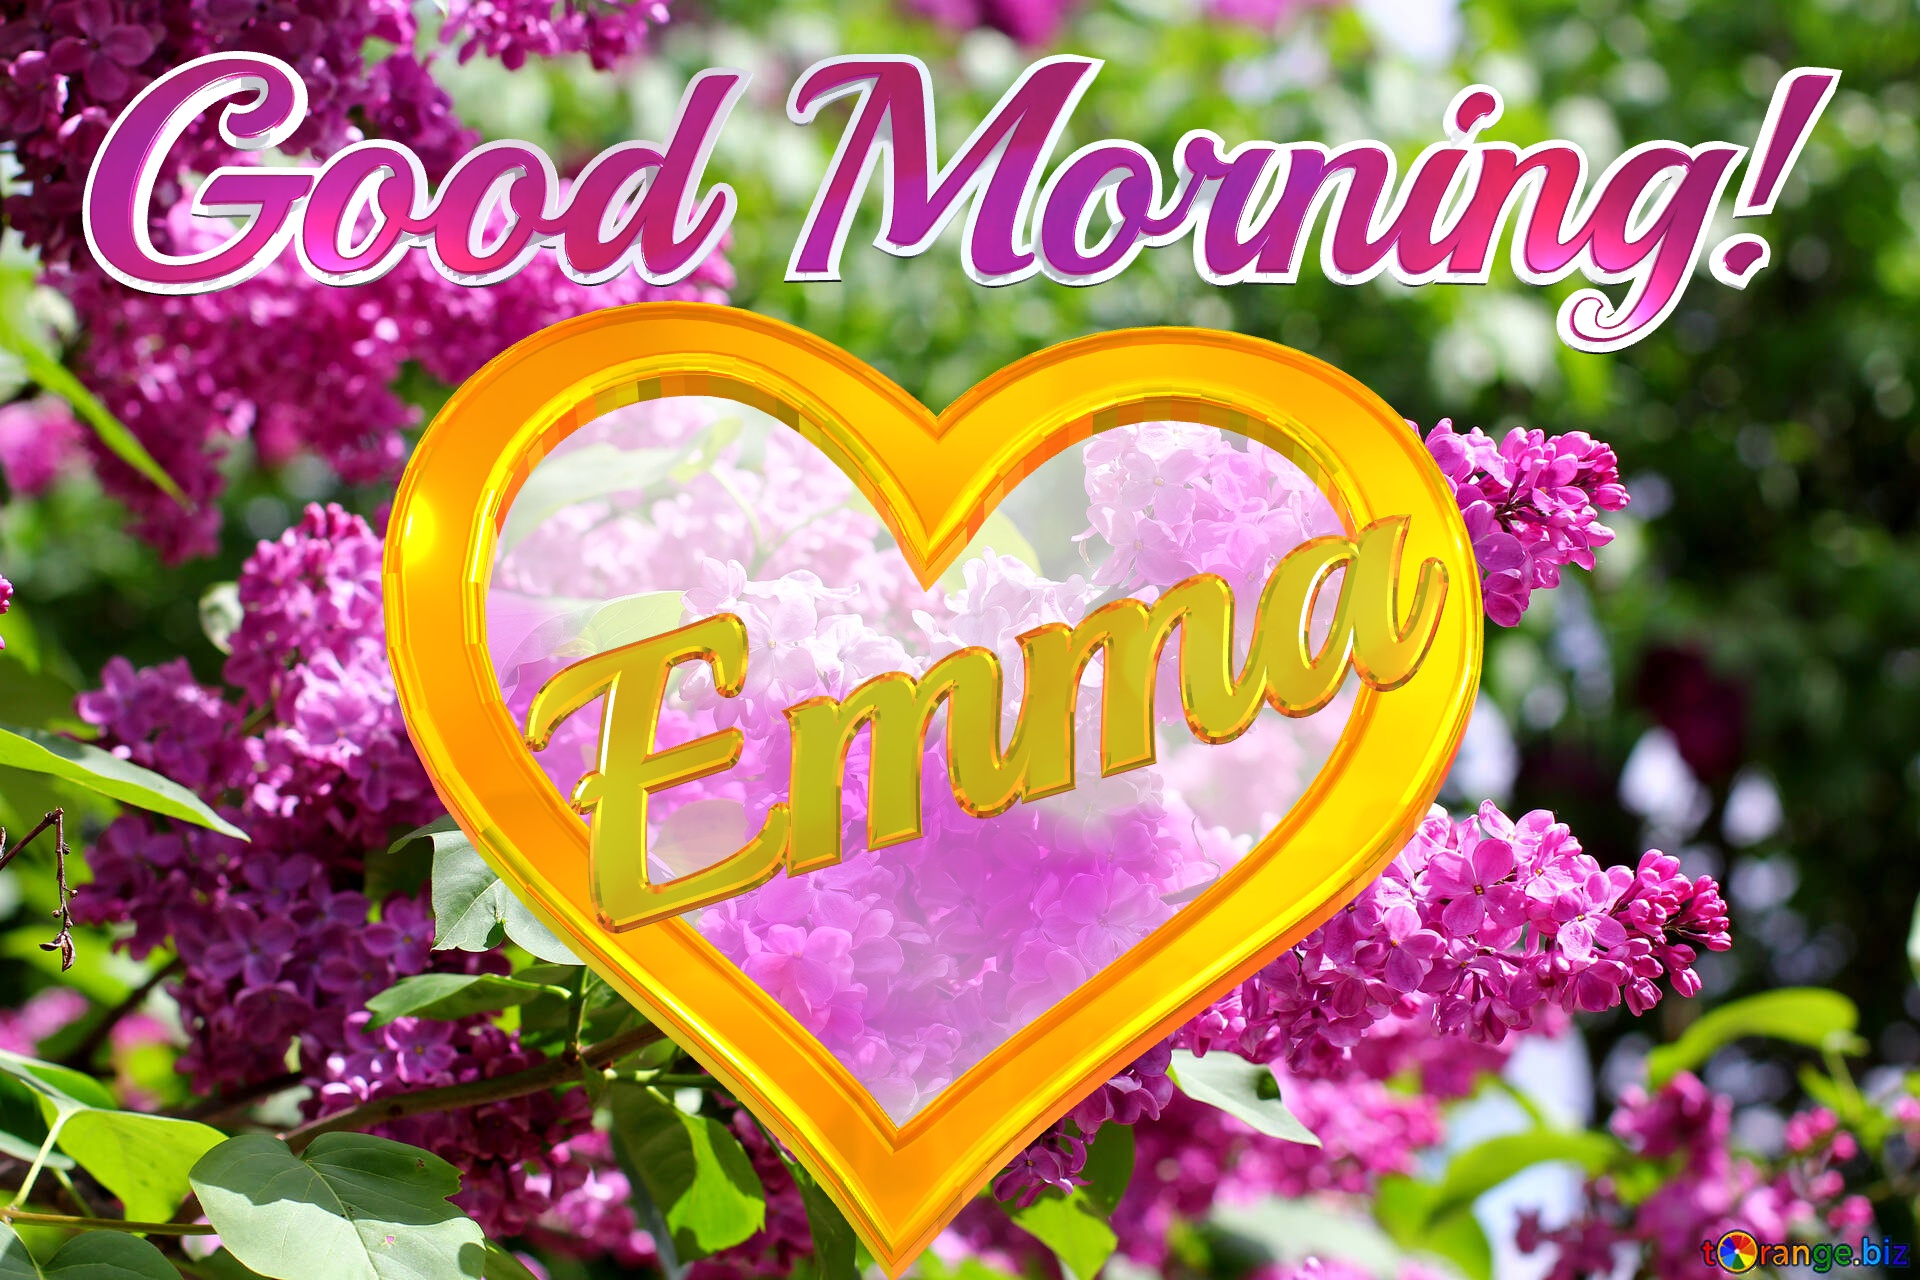  Good Morning! Emma   Bright picture with lilac flowers №37487